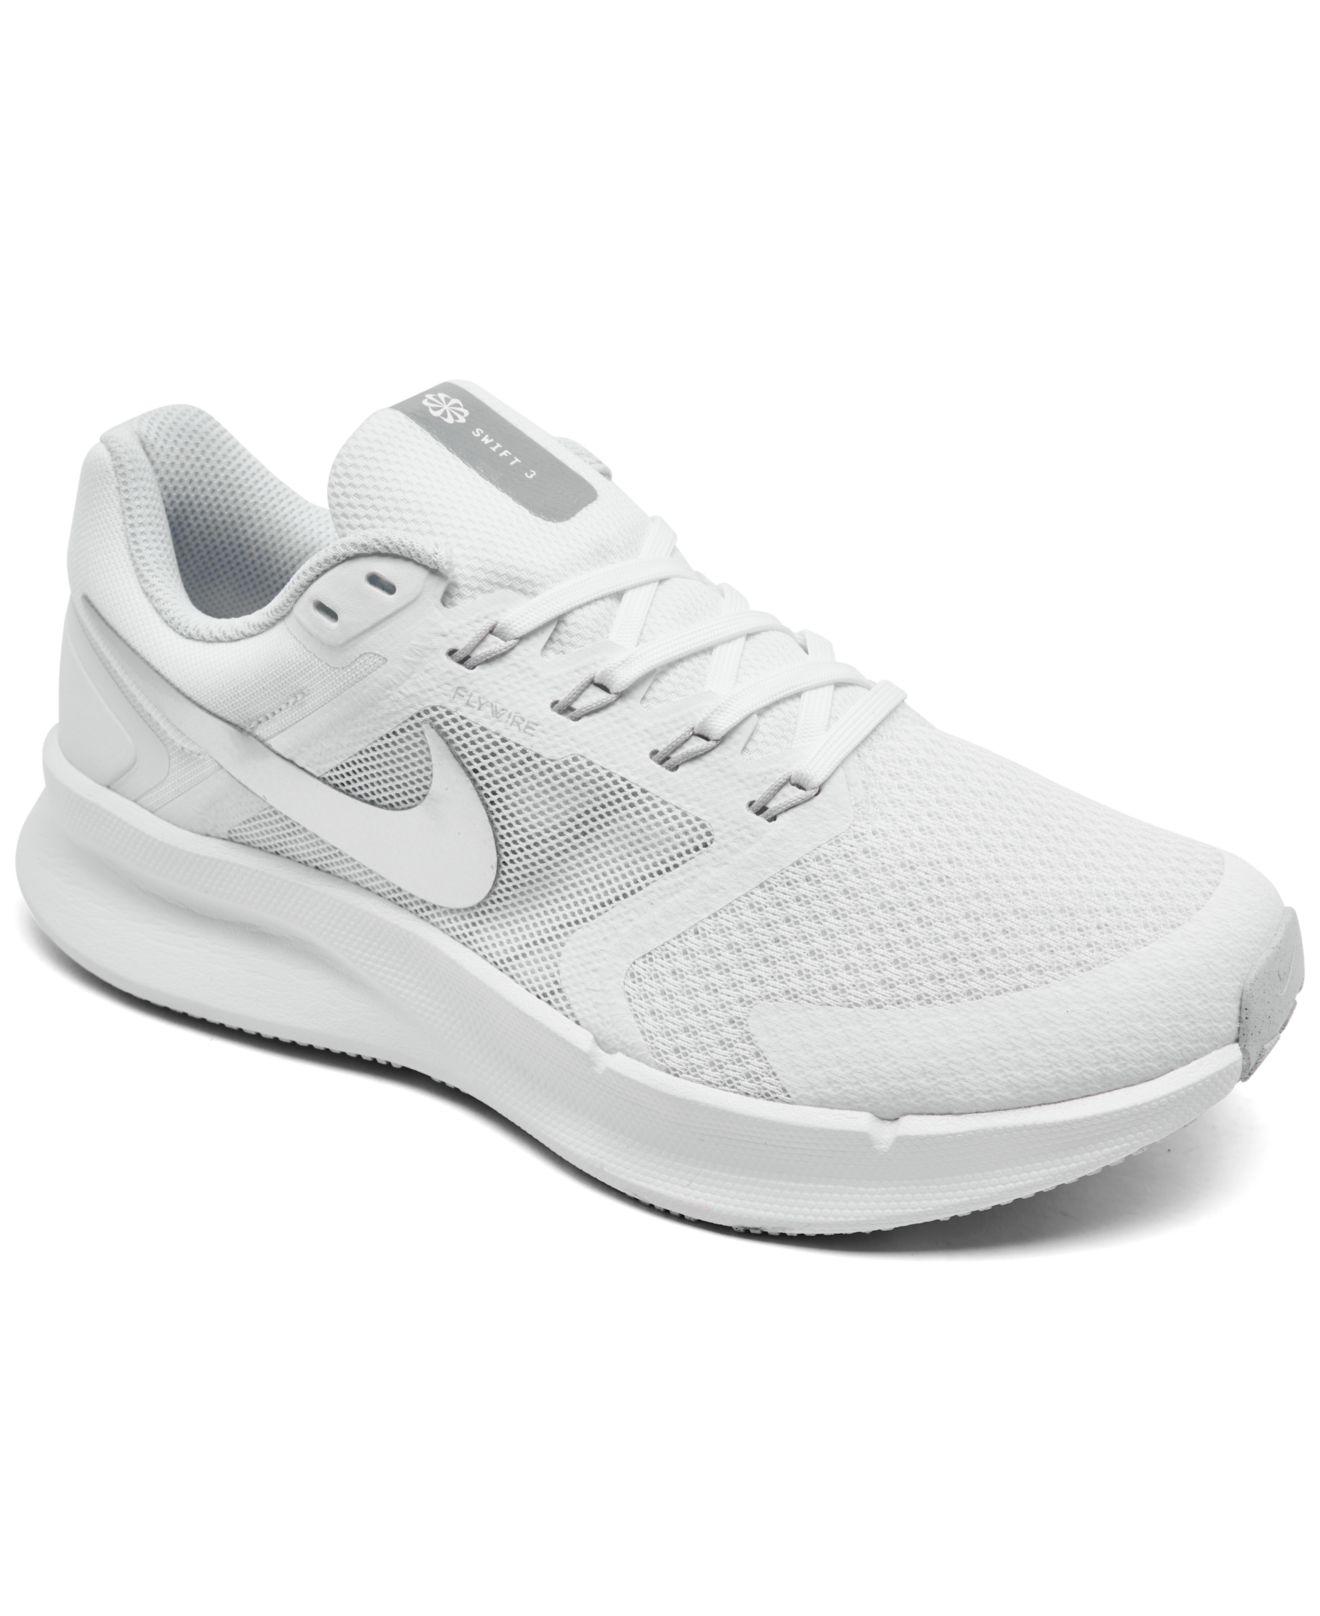 Nike Run Swift 3 Running Sneakers From Finish Line in White | Lyst